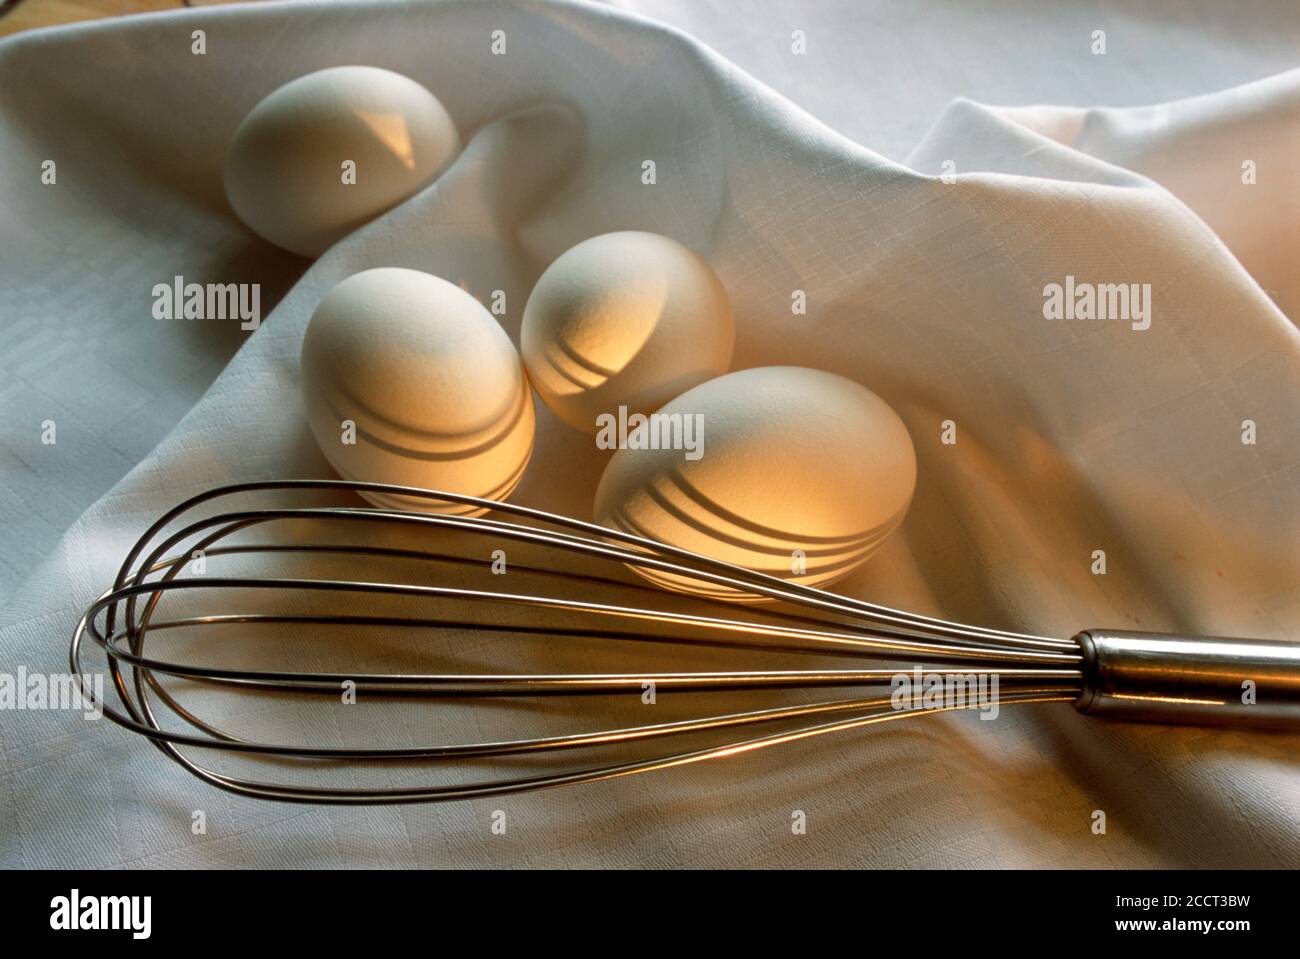 Still life of whisk with chicken eggs on white cloth in kitchen Stock Photo